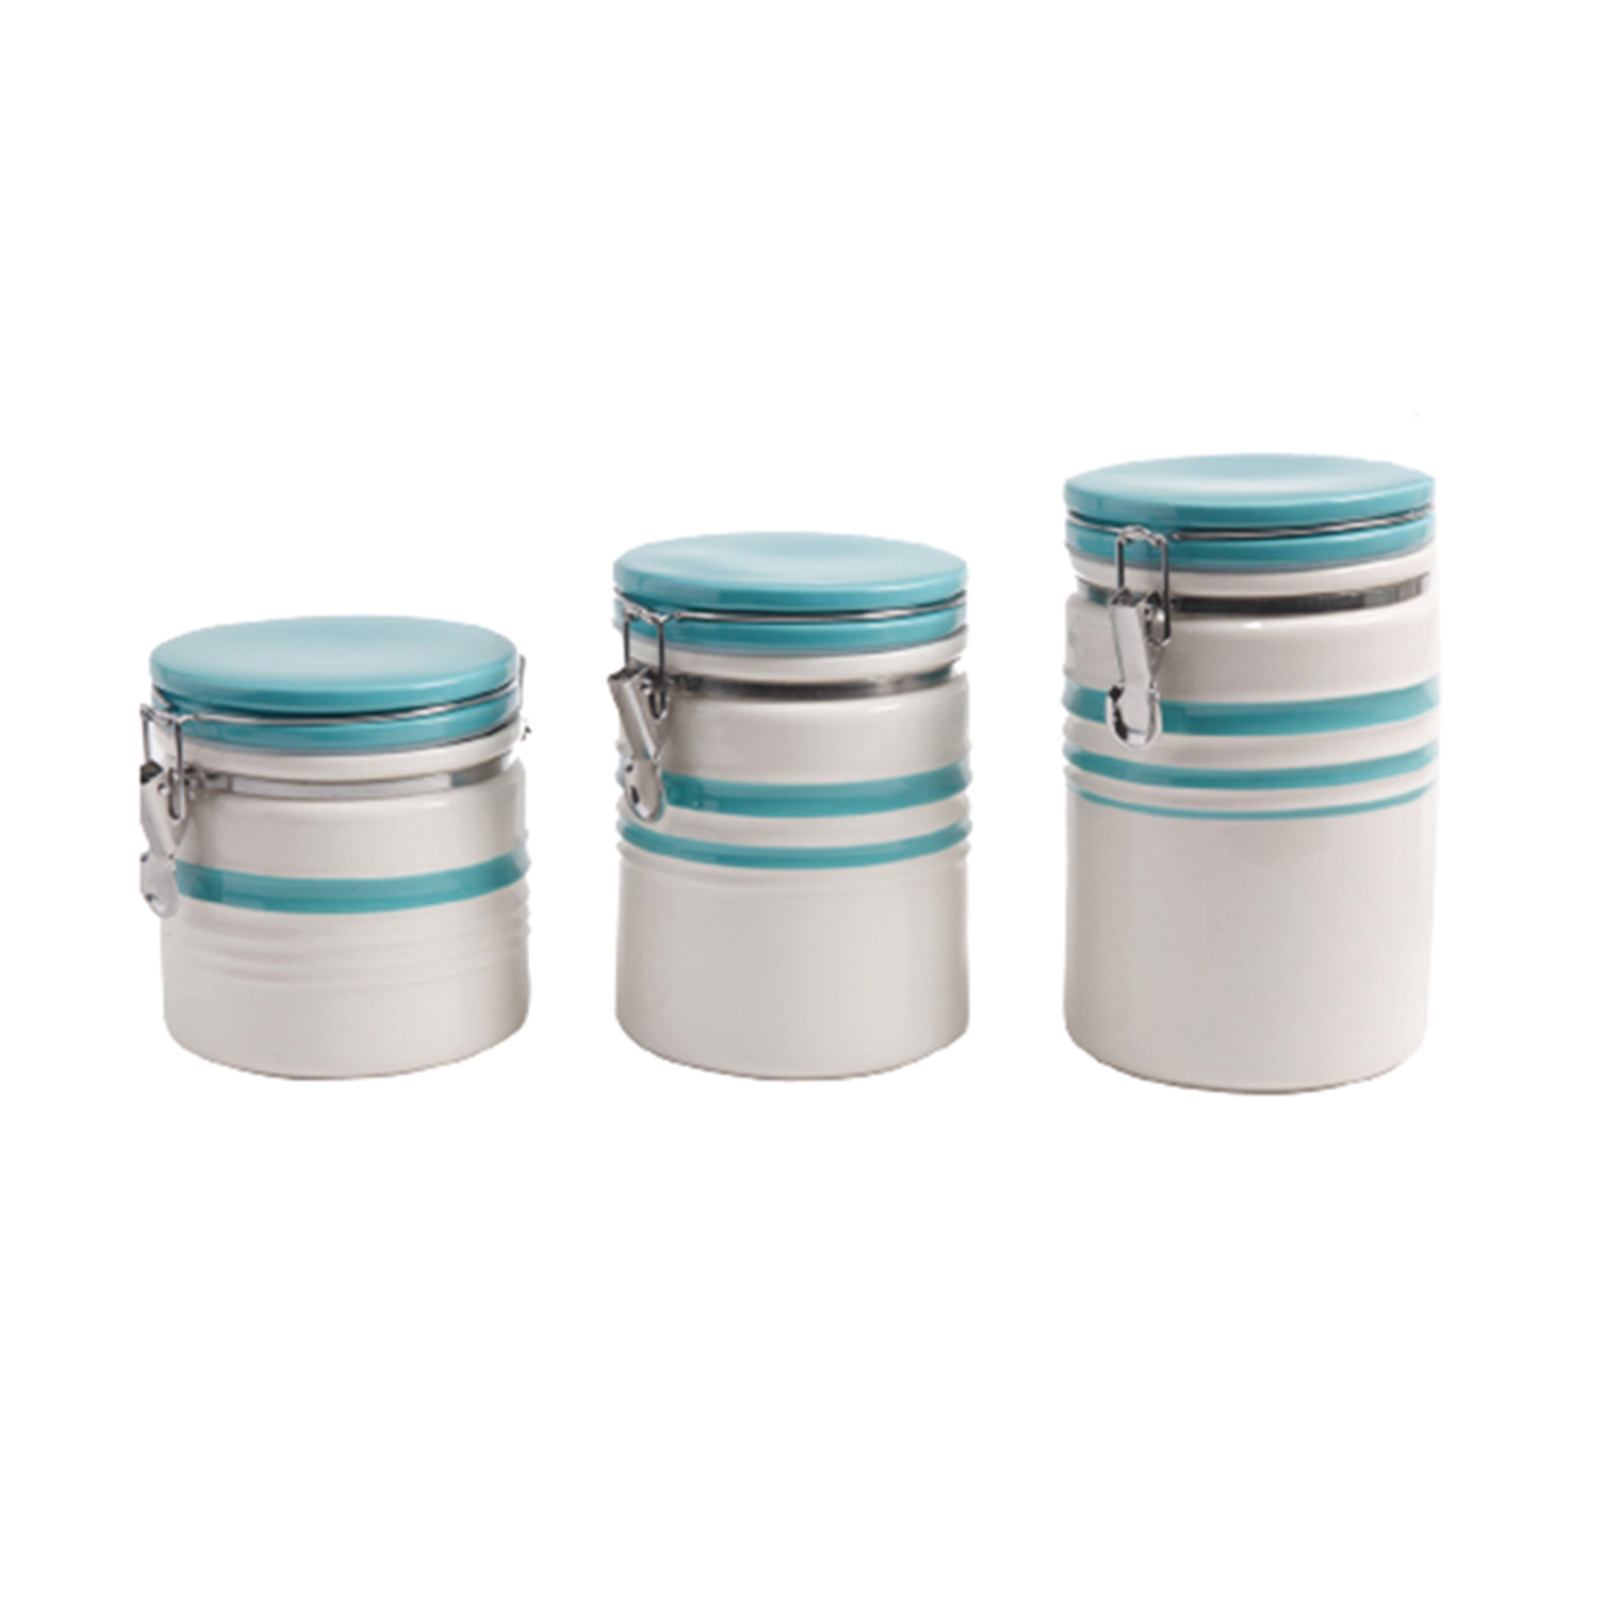 Gibson General Store Hollydale 3 Piece Canister Set